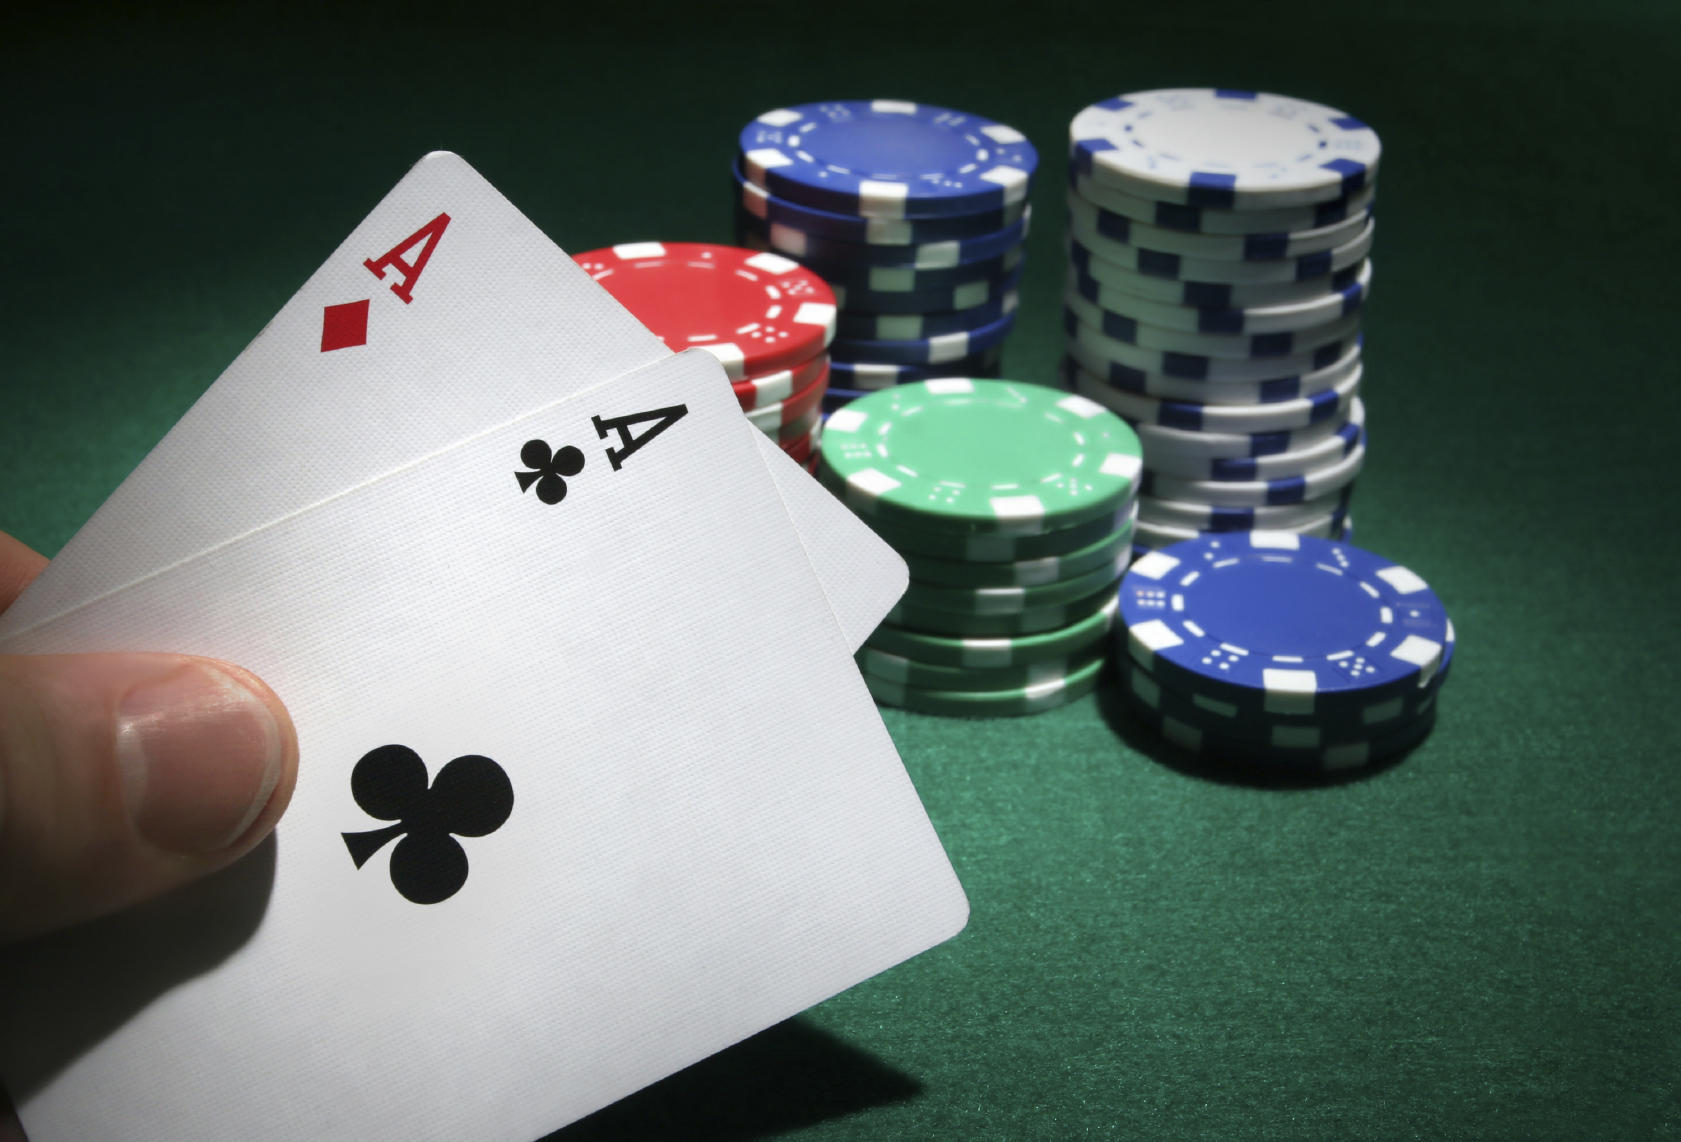 Top Tips for Texas hold ’em